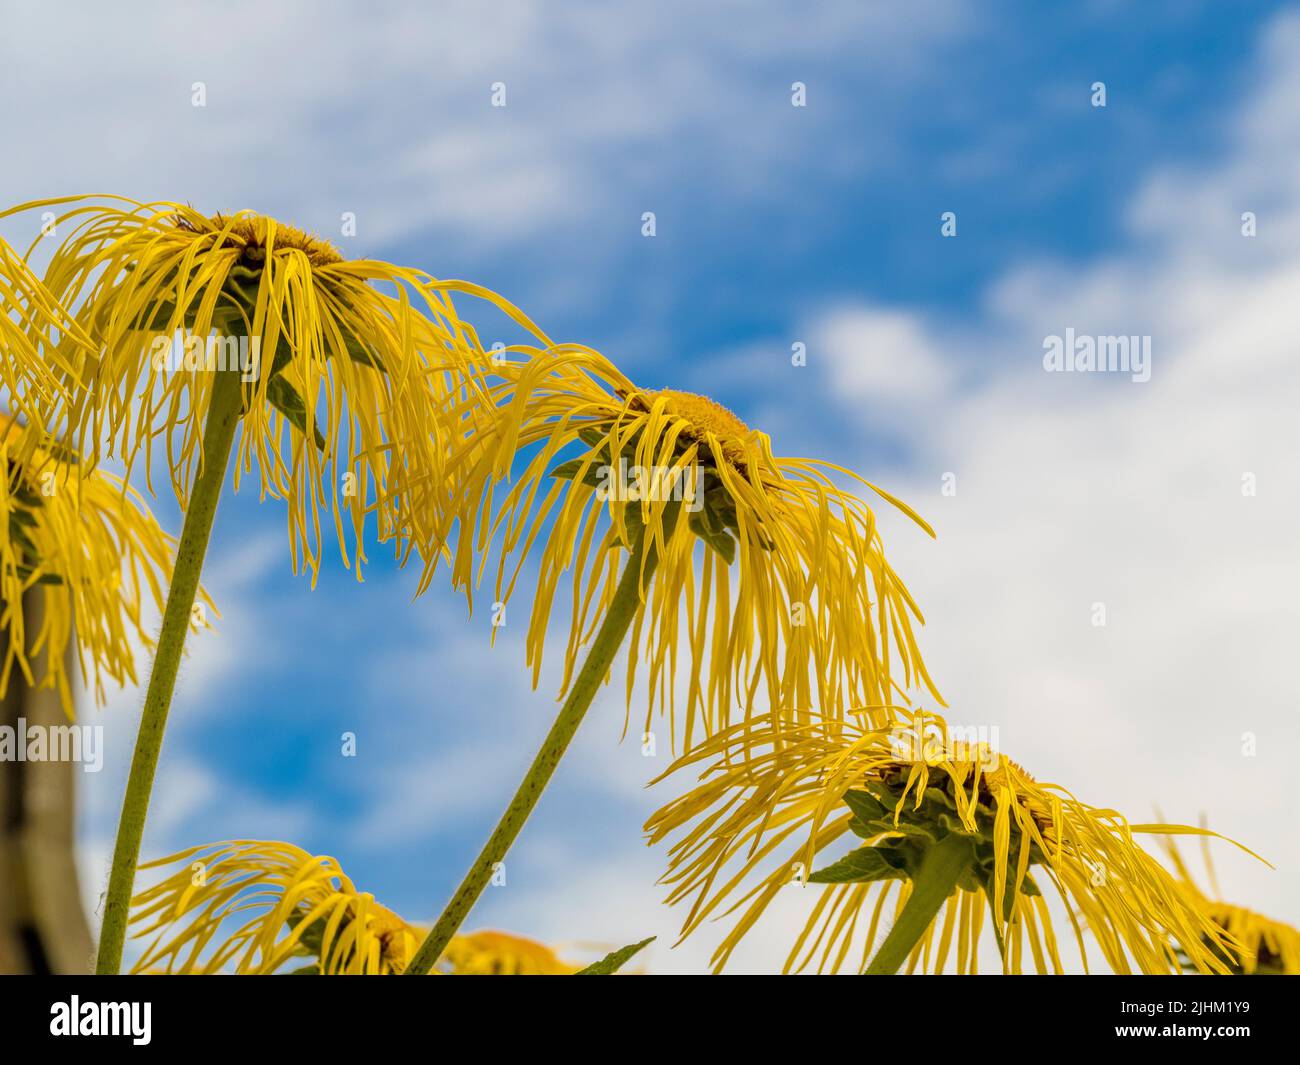 The shaggy yellow flowers of Inula magnifica growing in a UK garden seen against a blue sky. Stock Photo